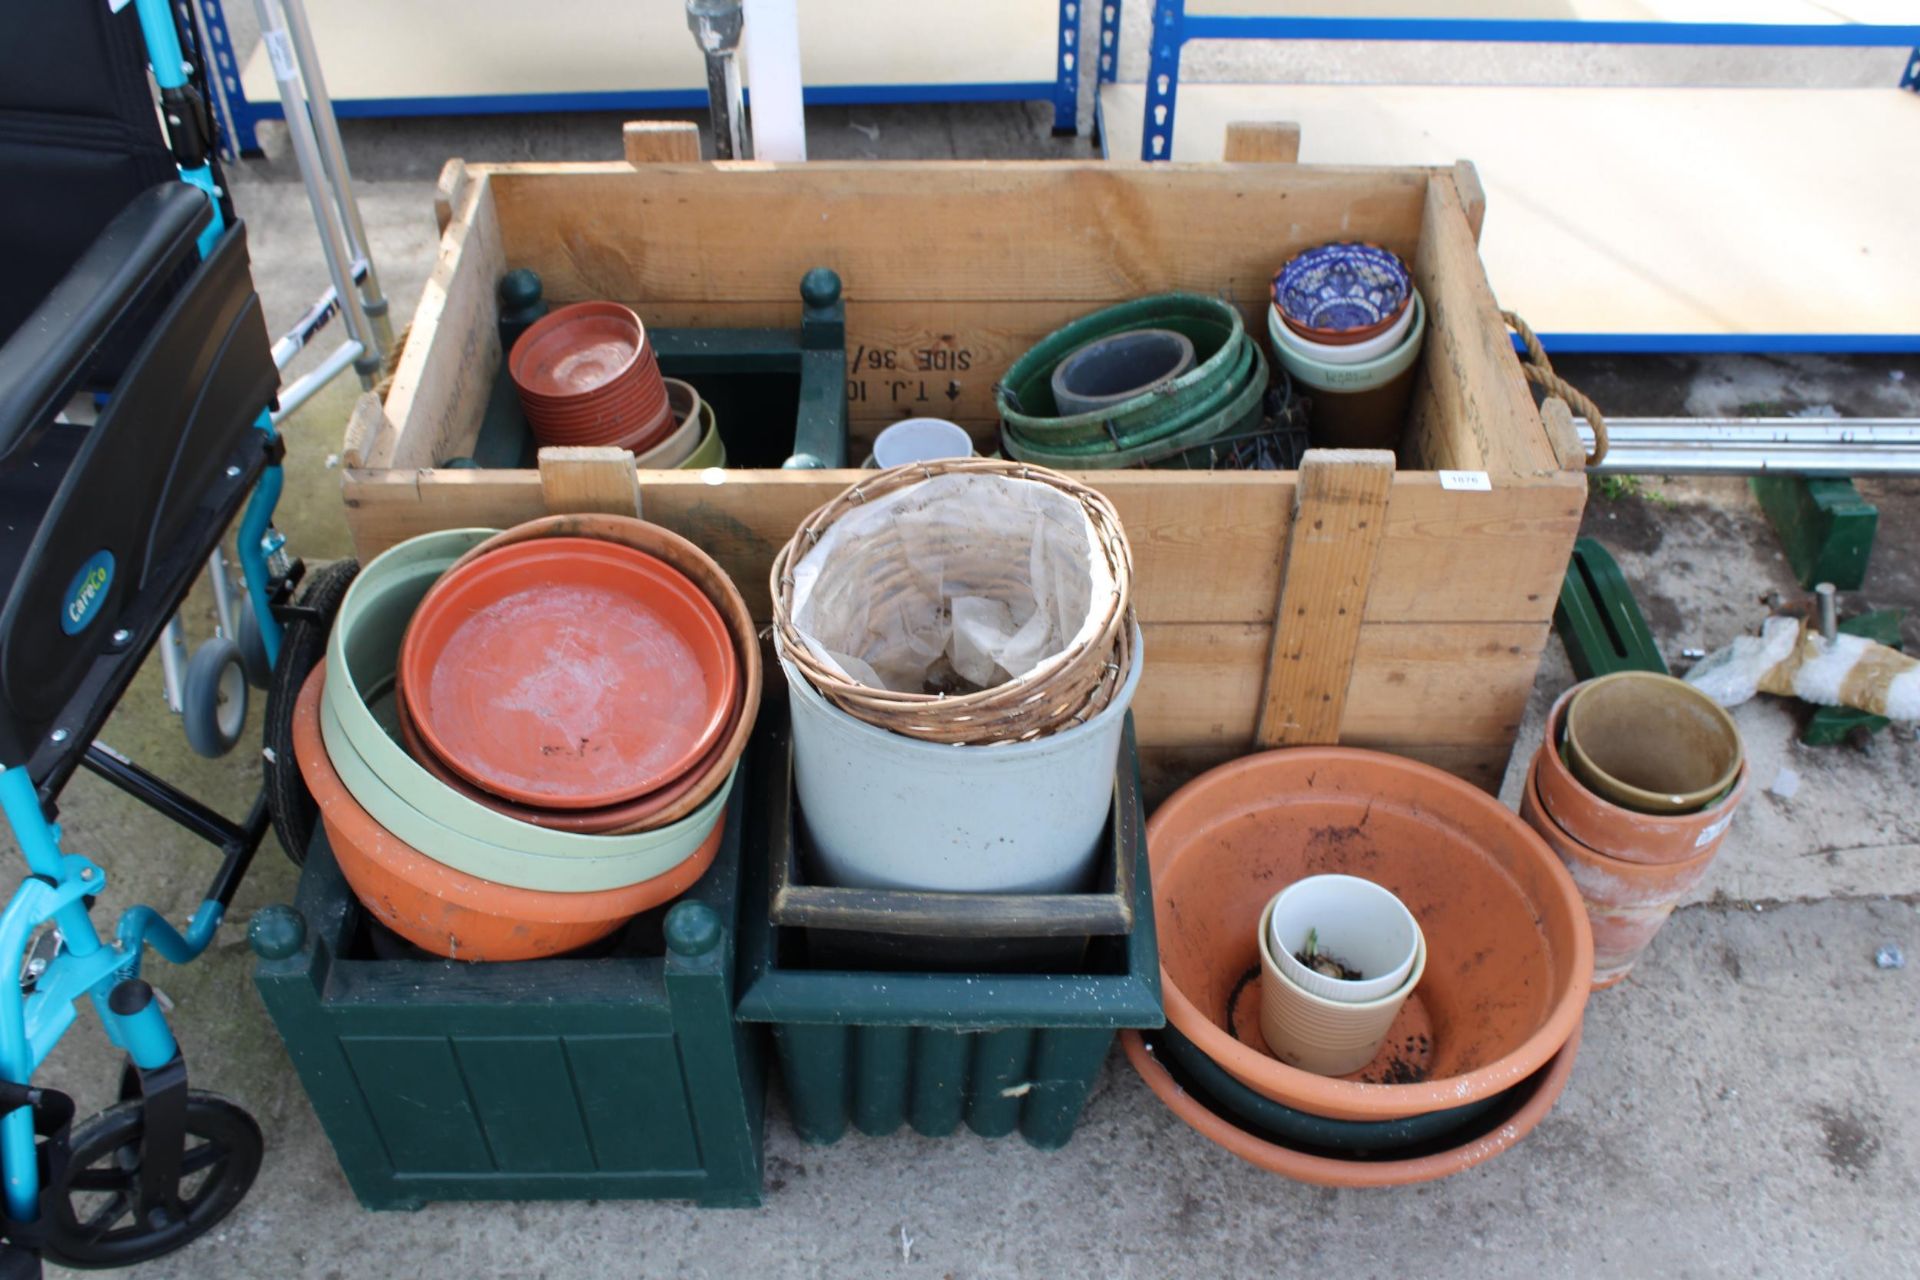 A LARGE WOODEN CRATE WITH ROPE HANDLES AND AN ASSORTMENT OF PLASTIC, WOODEN AND TERRACOTTA PLANT